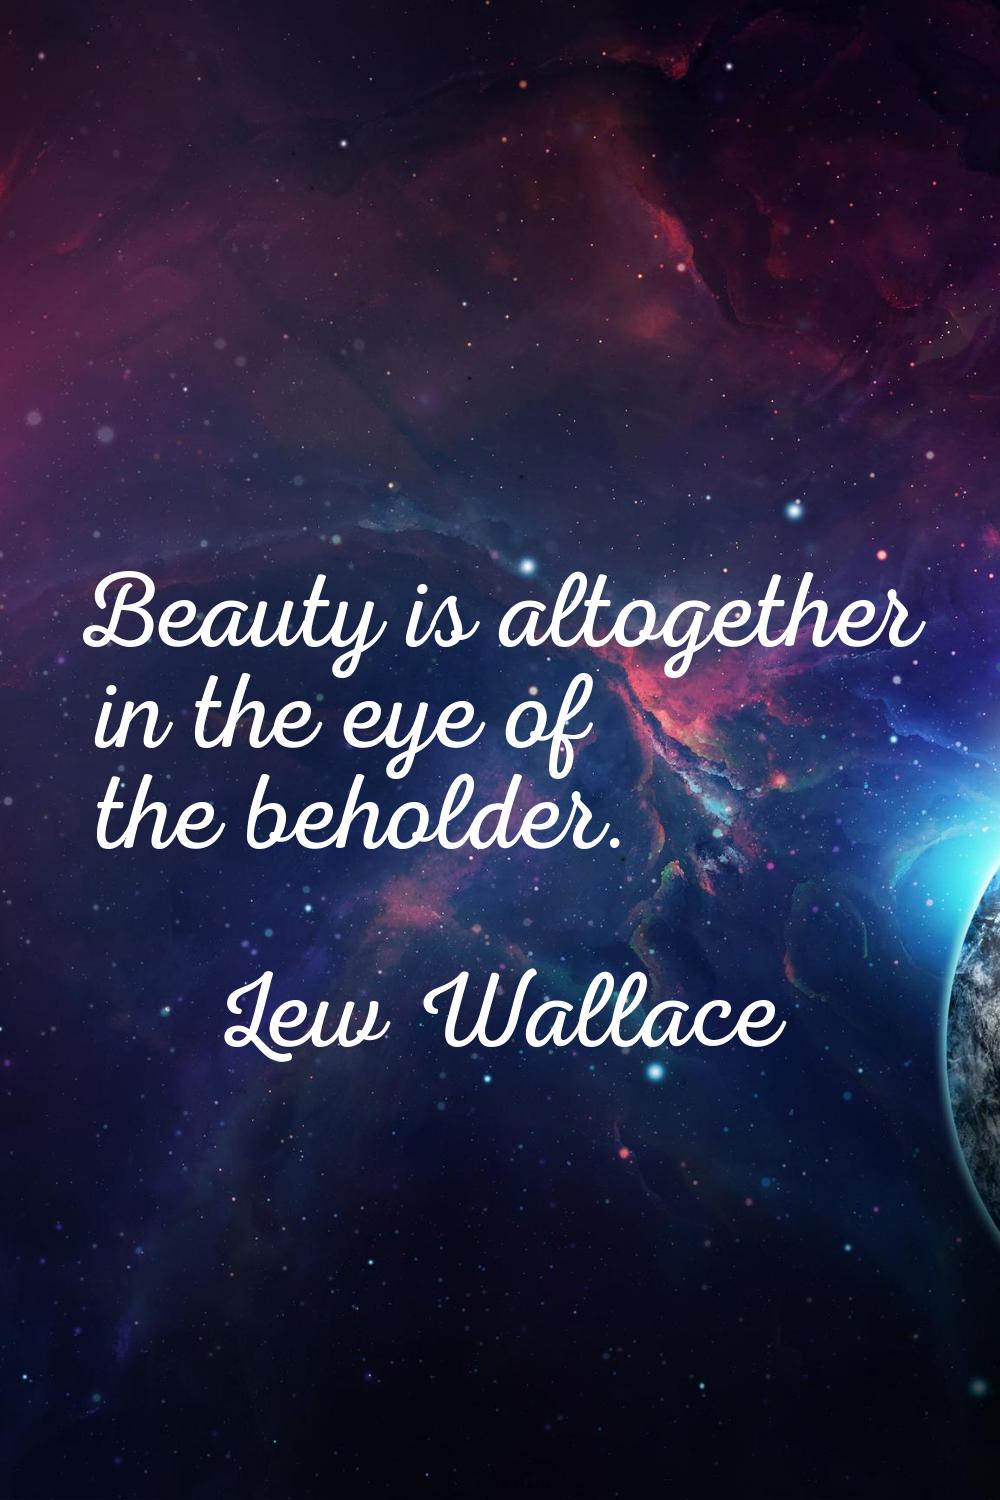 Beauty is altogether in the eye of the beholder.